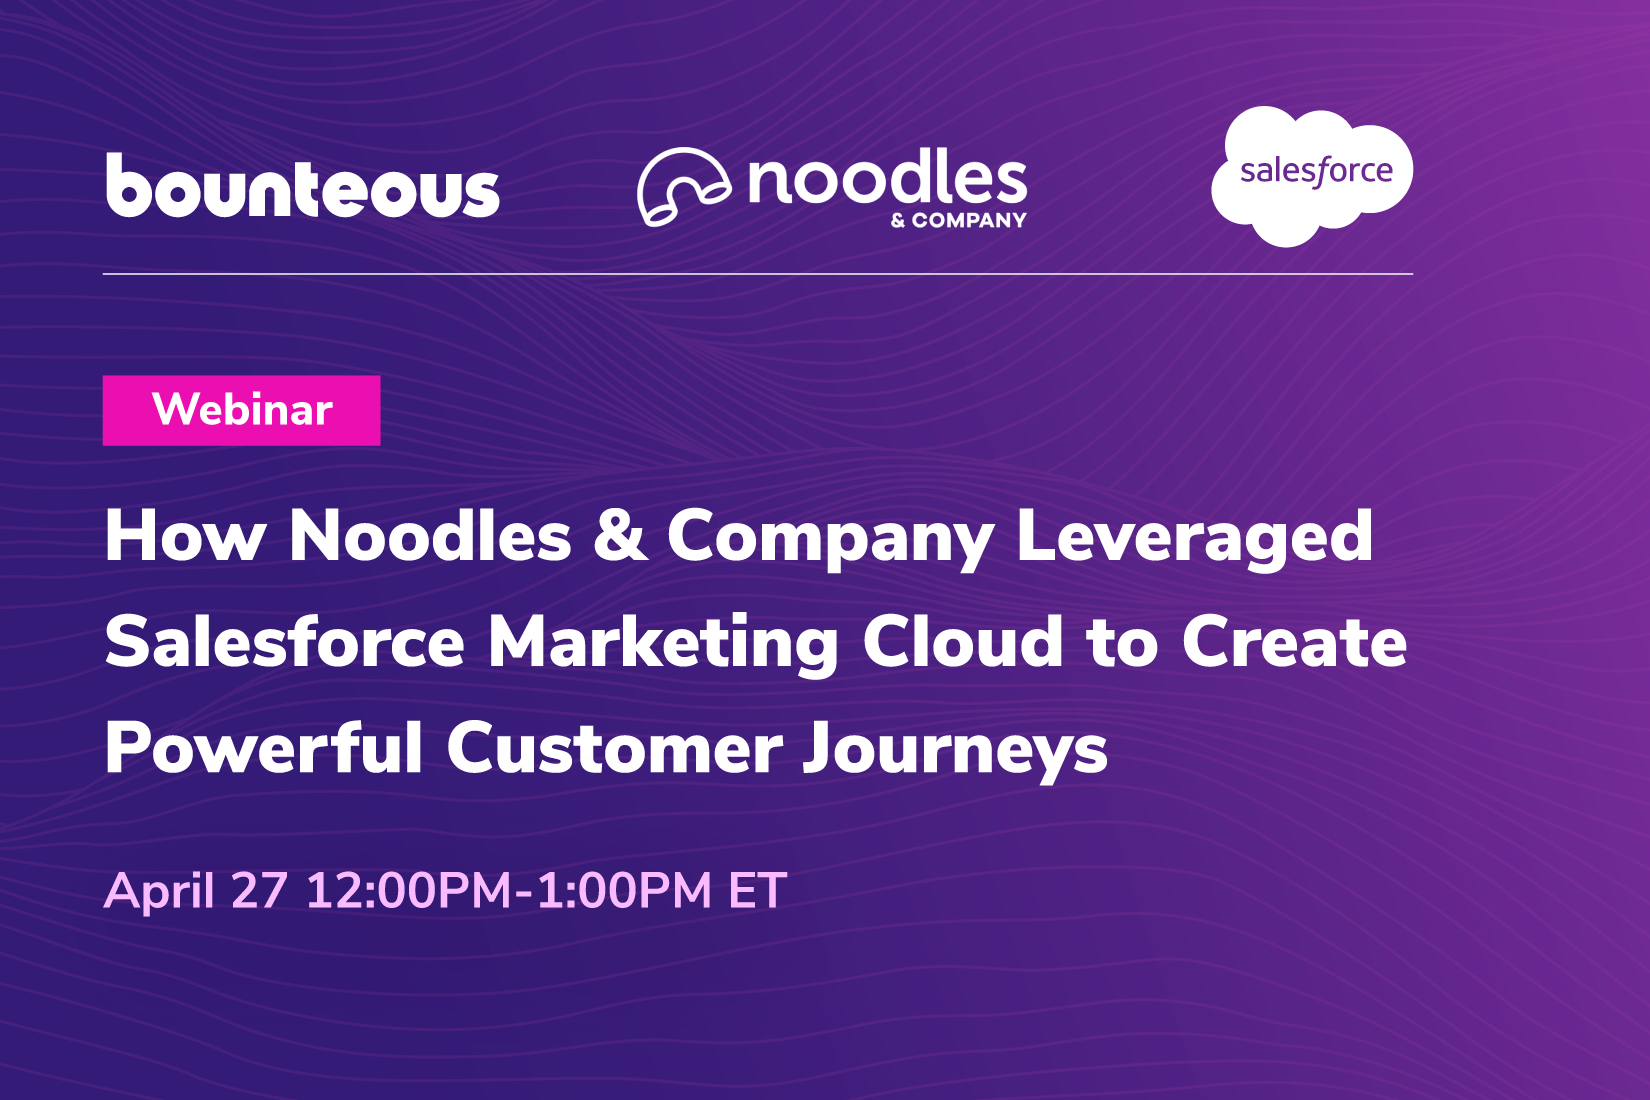 How Noodles & Company Leveraged Salesforce Marketing Cloud To Create Powerful Customer Journeys